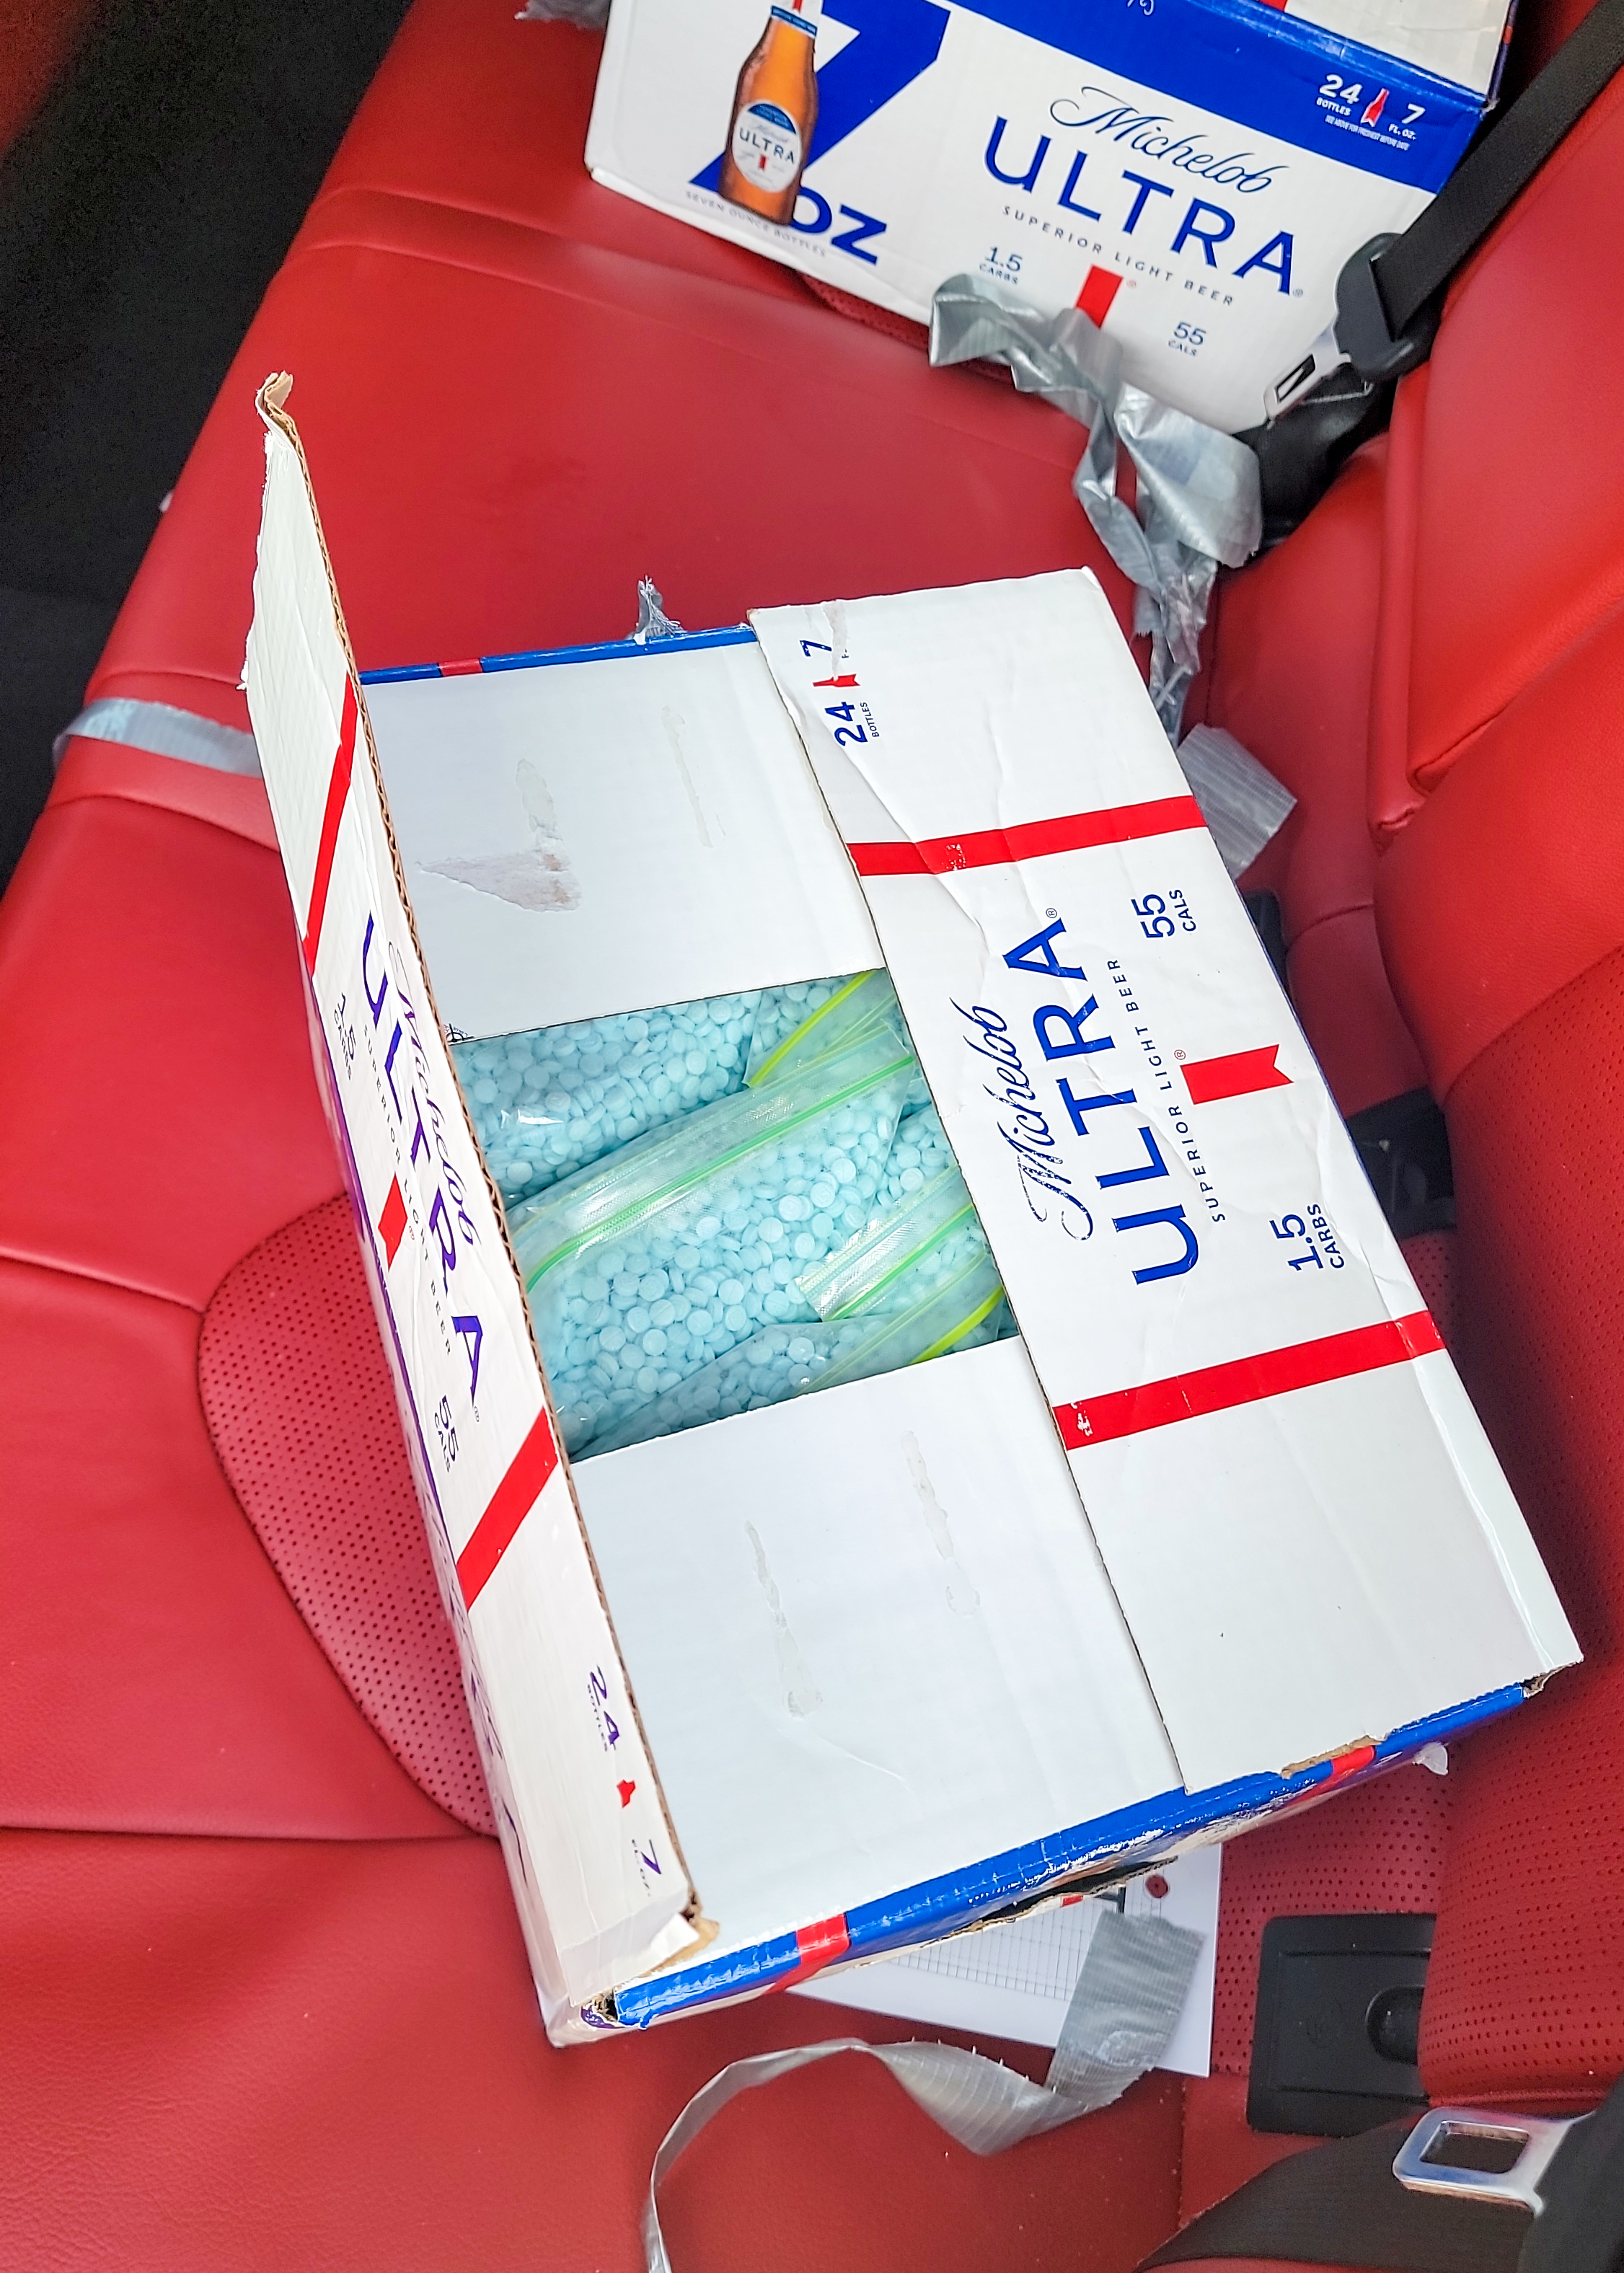 Bags of blue pills in beer box in the back seat of a car